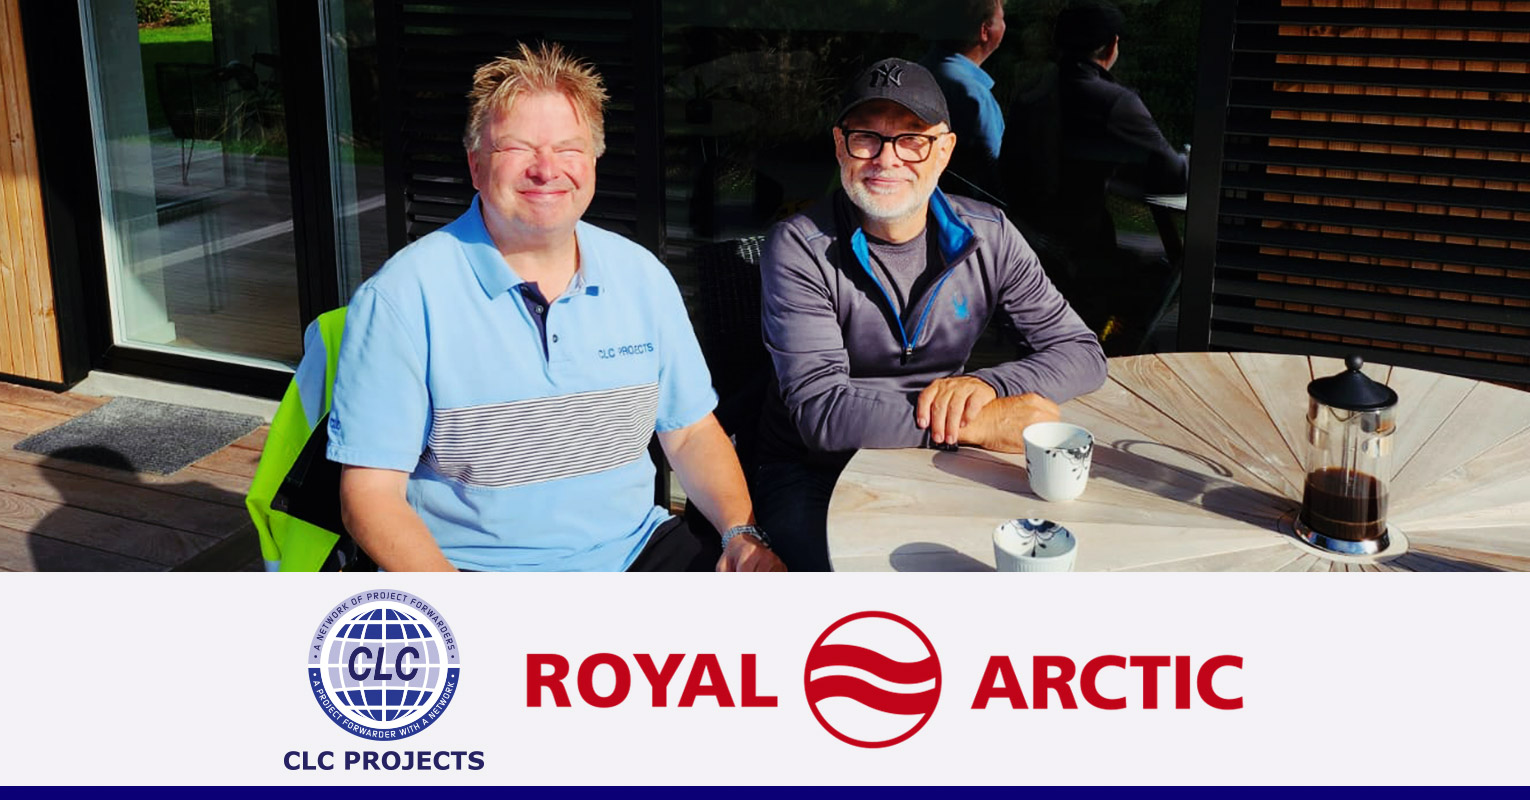 CLC Projects Chairman with Mr. Esper Boel, Project Manager at Royal Arctic Line in Ebeltoft, Denmark